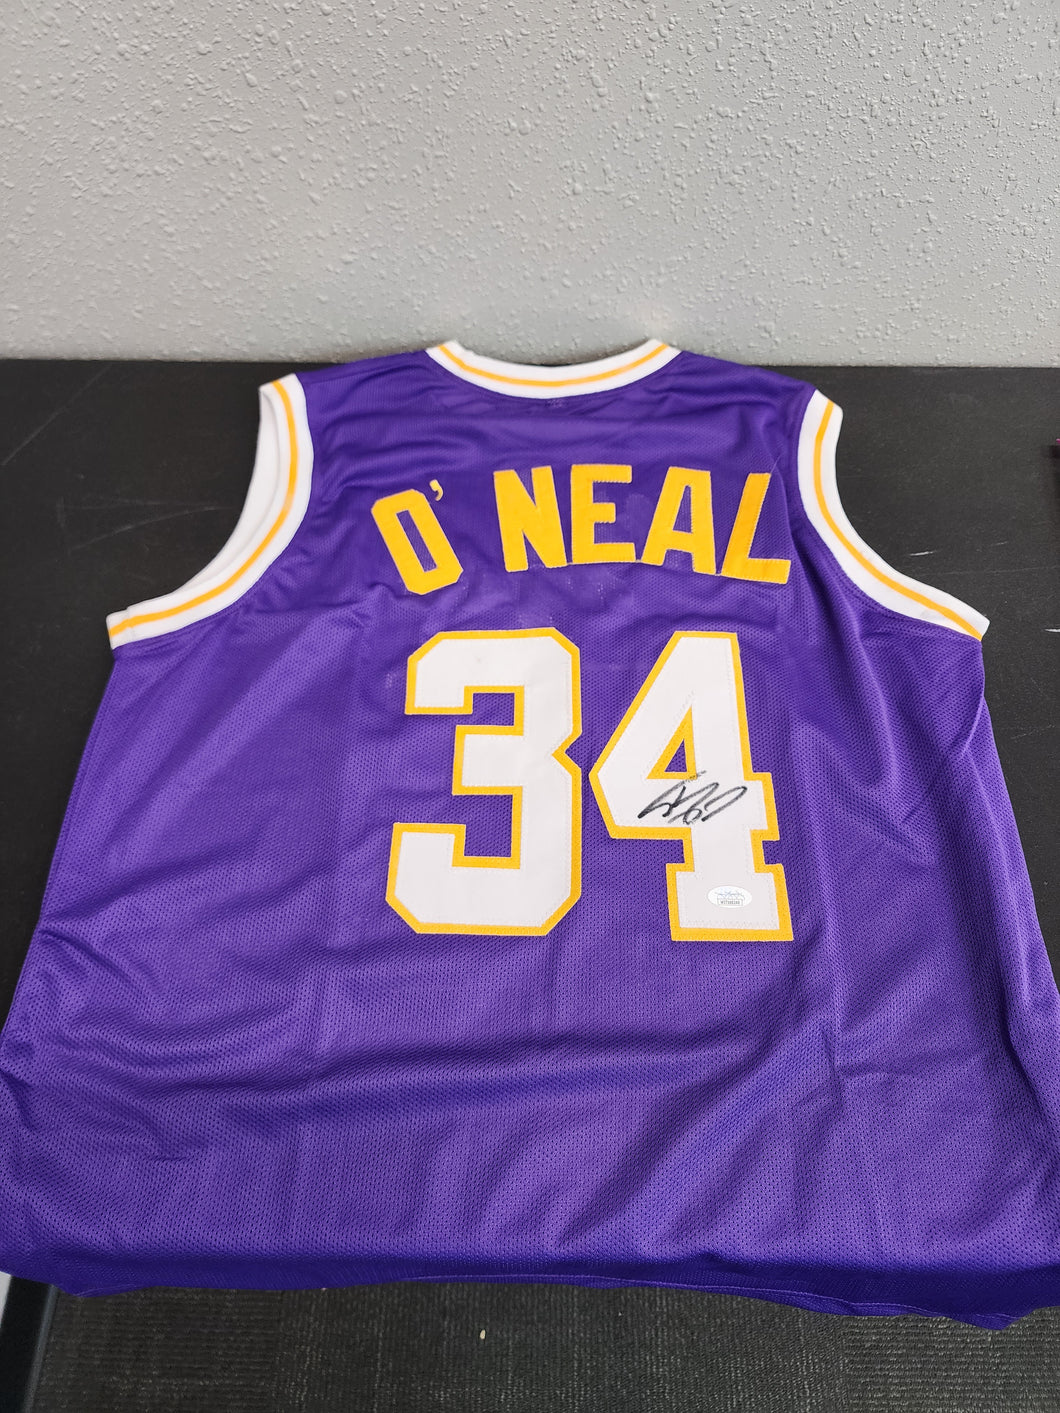 Shaquille O'Neal Los Angeles Lakers Jersey Signed